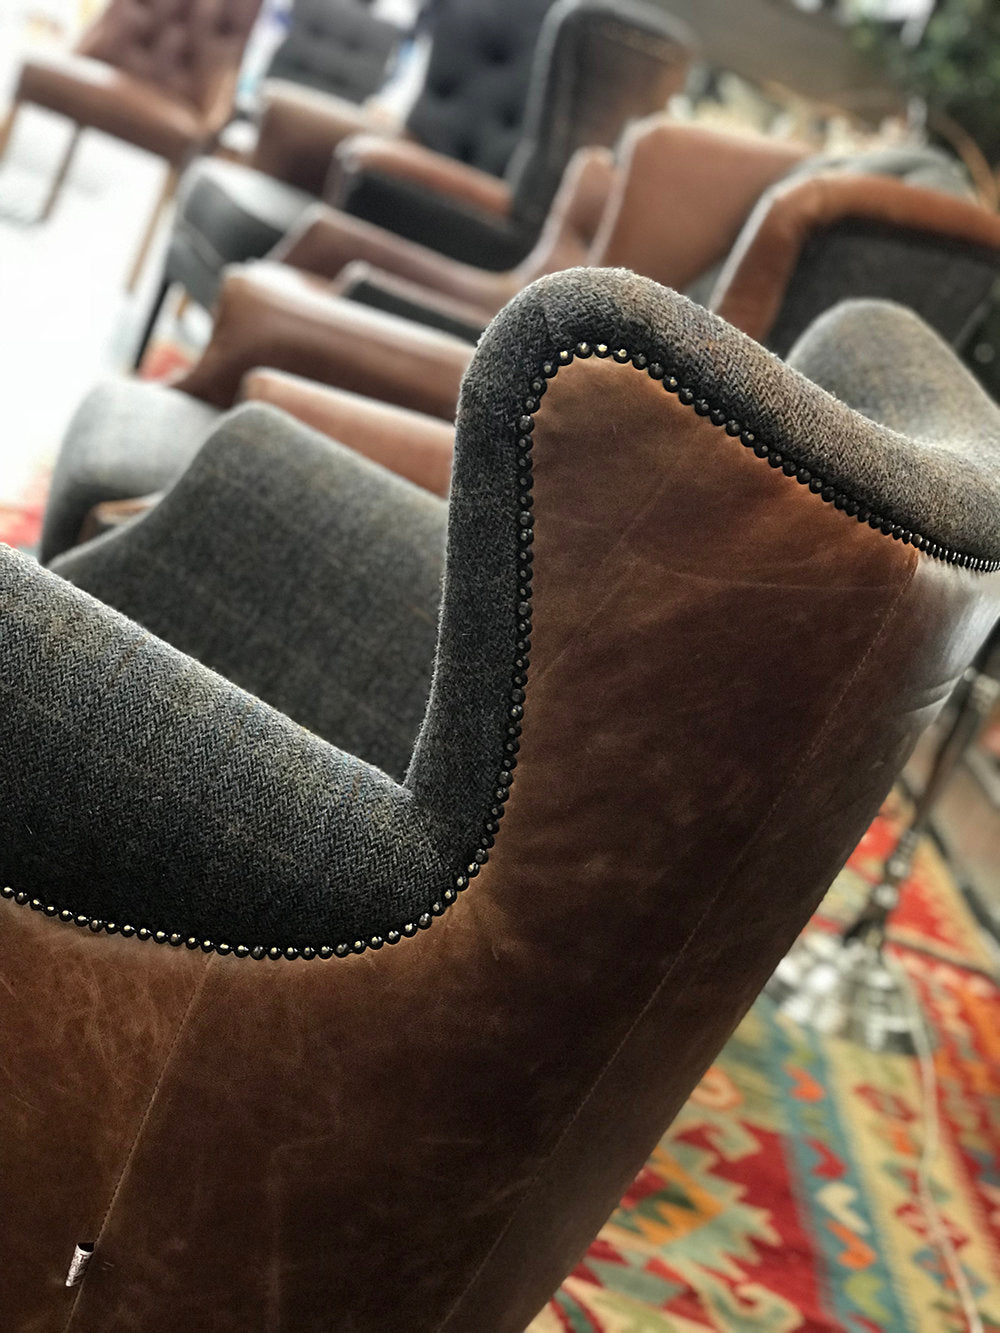 Kensington Arm Chairs leather and fabric from Top Secret Furniture